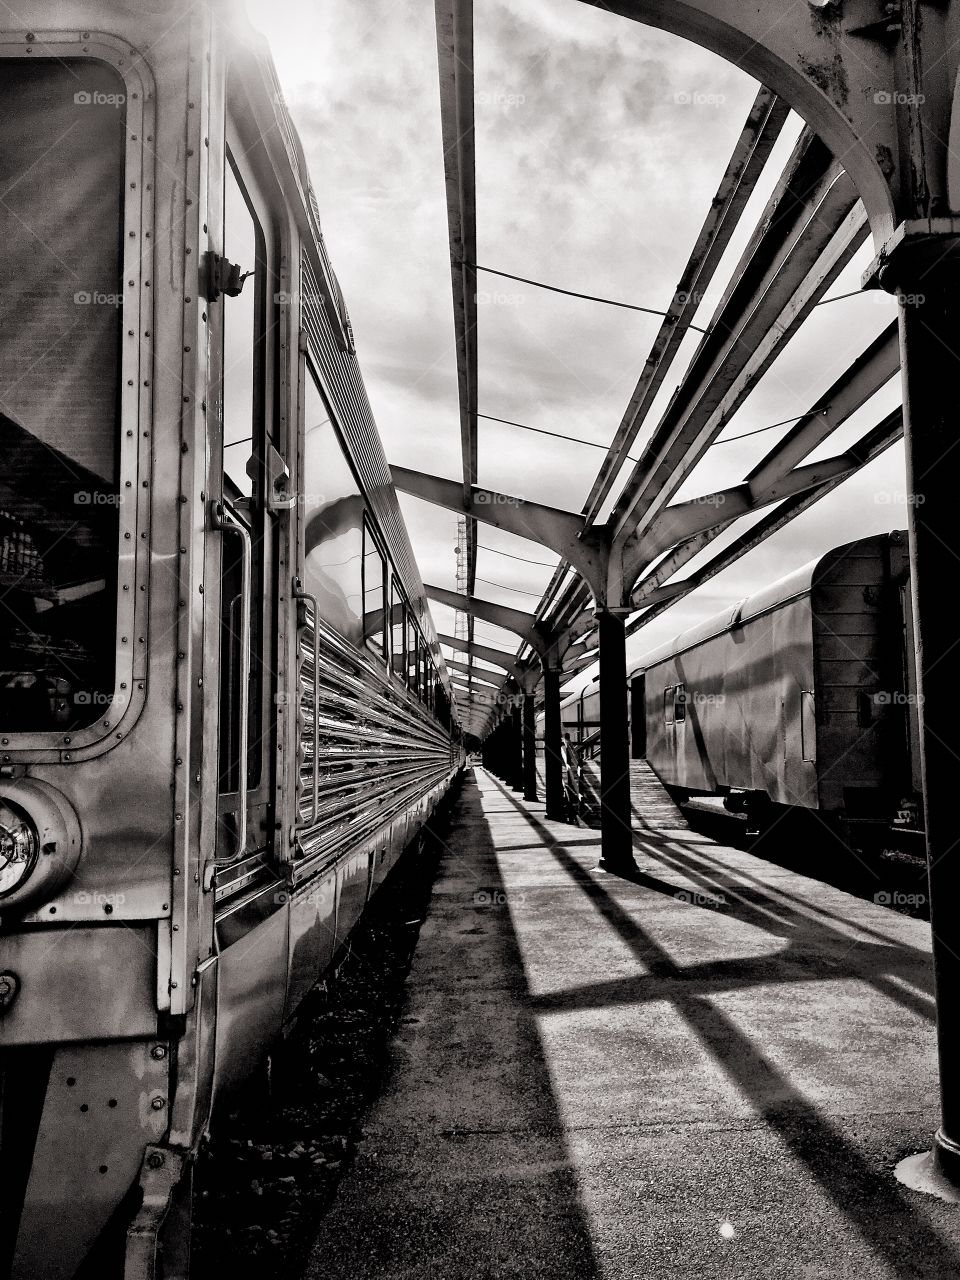 This is a black and white photograph I captured at the train station, at the coliseum in Saint Louis Missouri. I’m fascinated by shadows, and also like the modern feel along with the perspective shot of the train. 